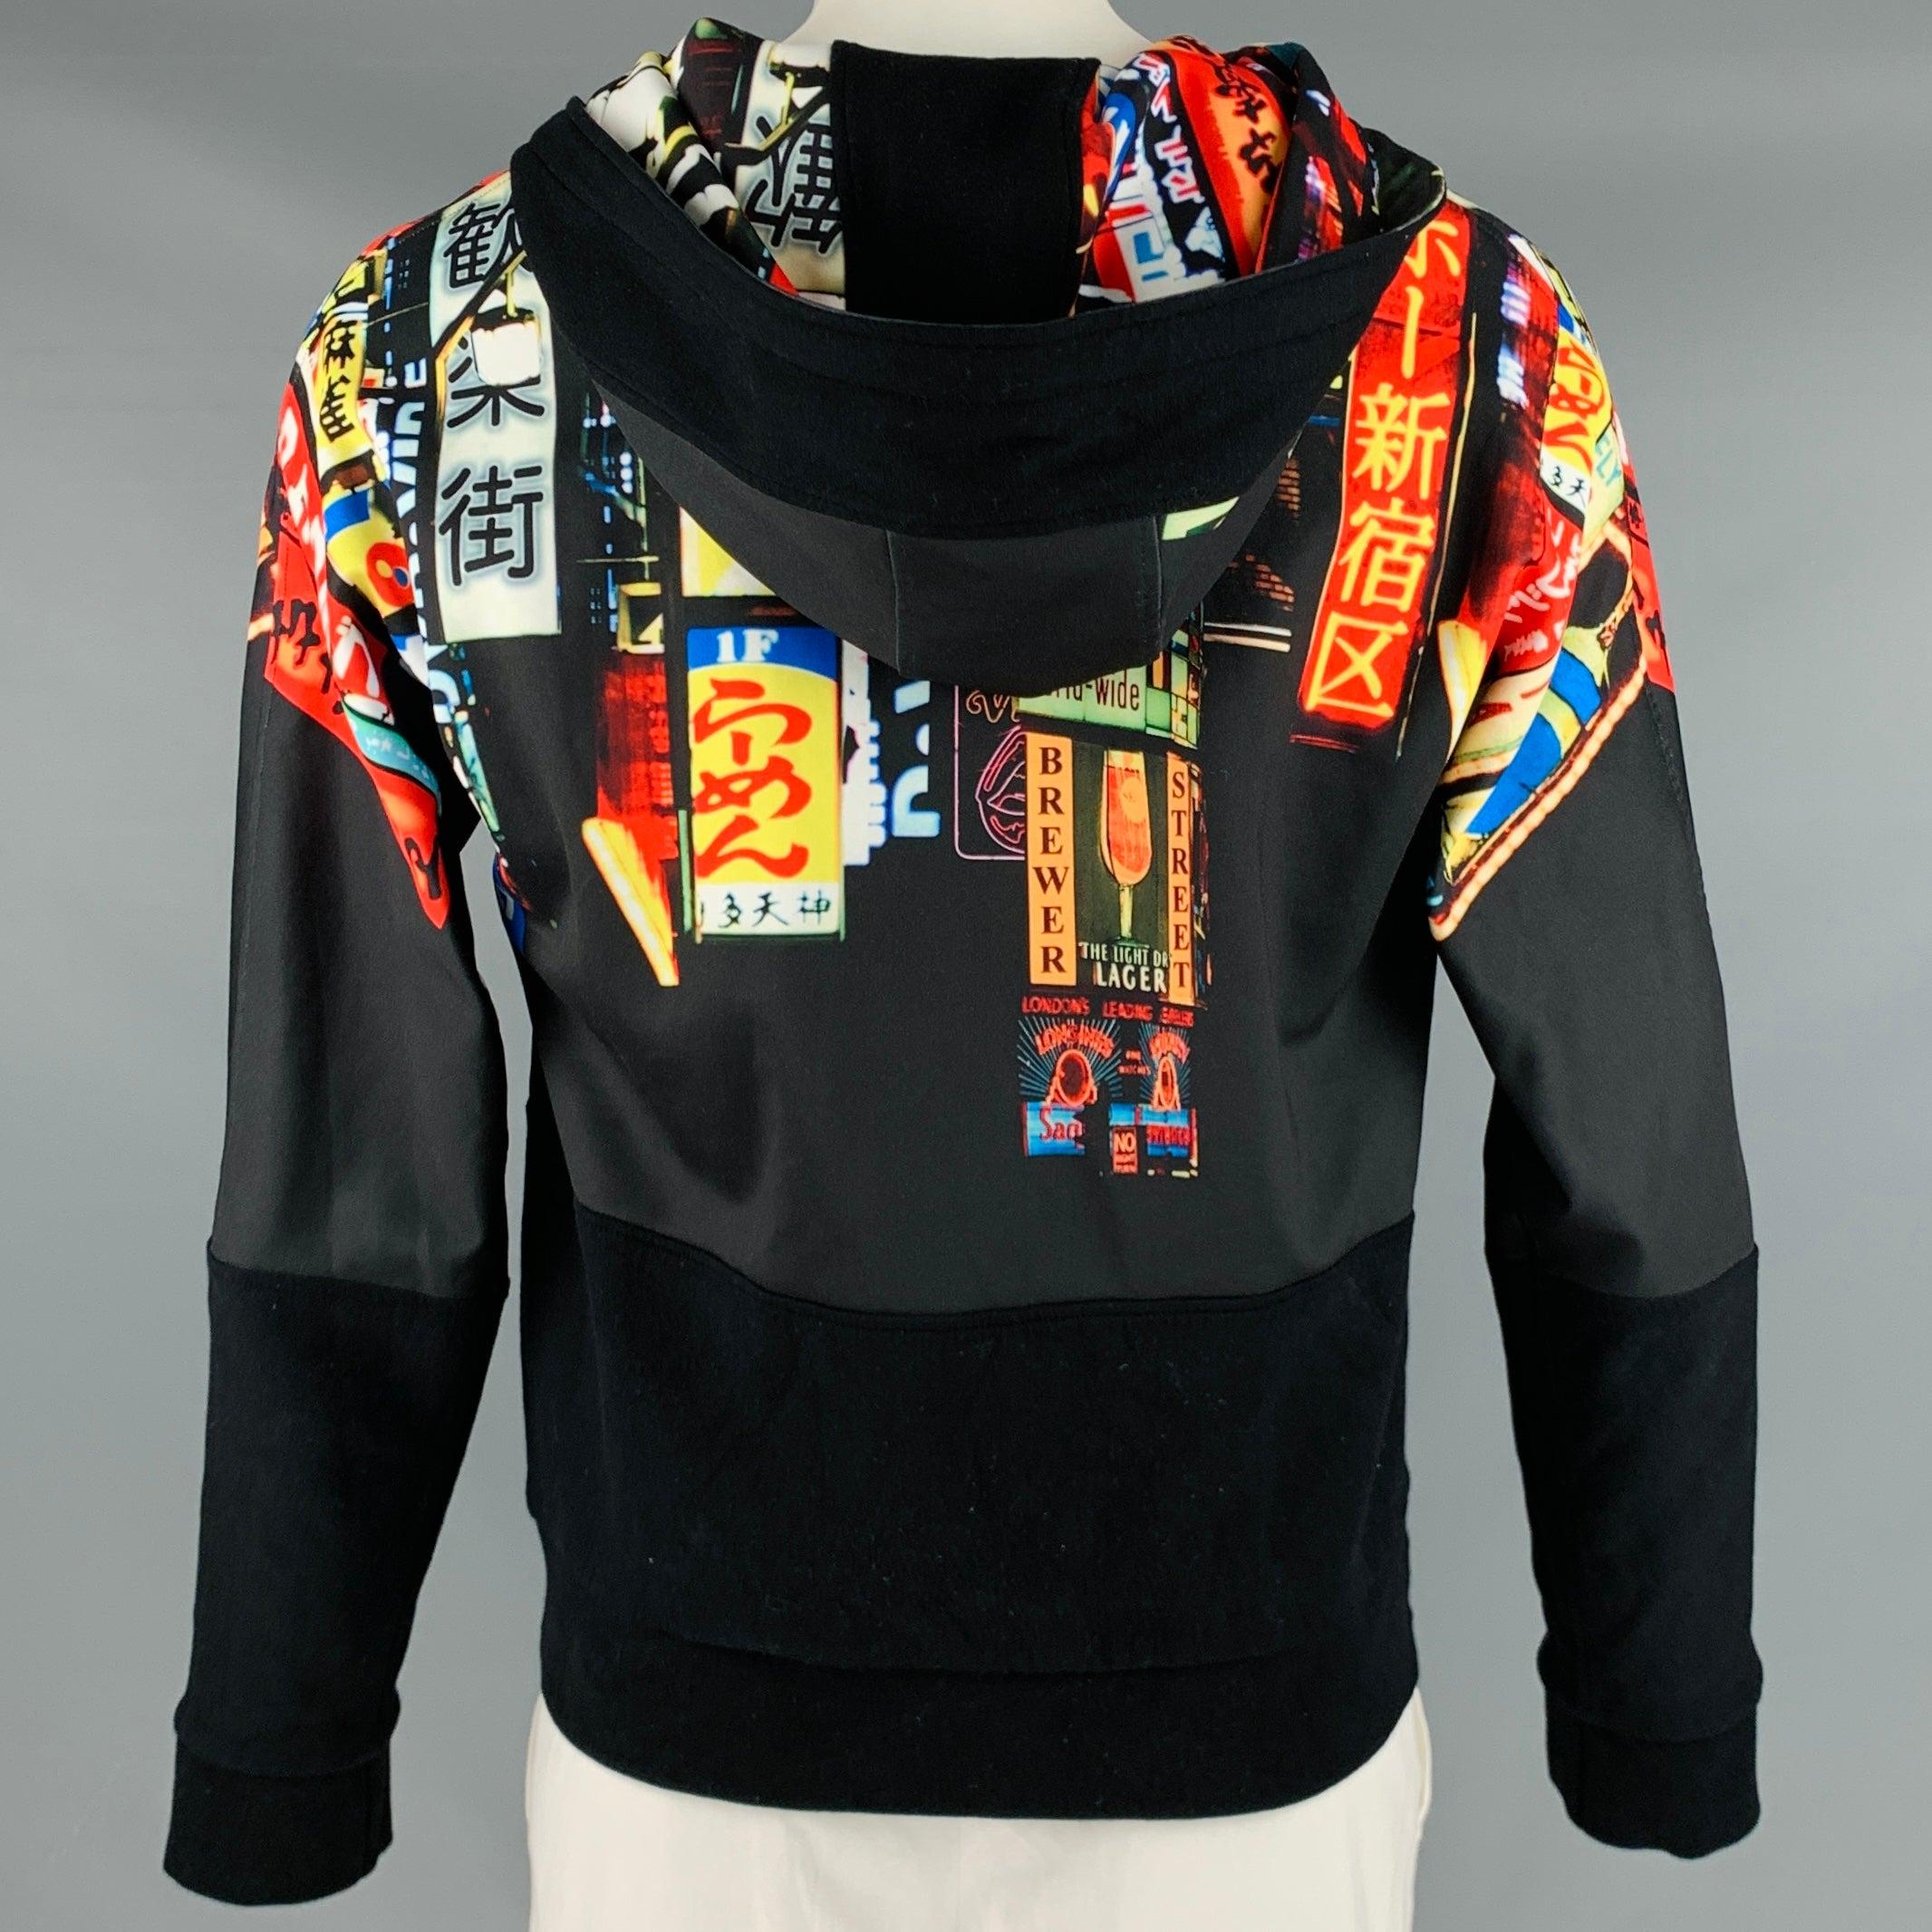 NEIL BARRETT Size L Black Multi Color Print Hooded Jacket In Good Condition For Sale In San Francisco, CA